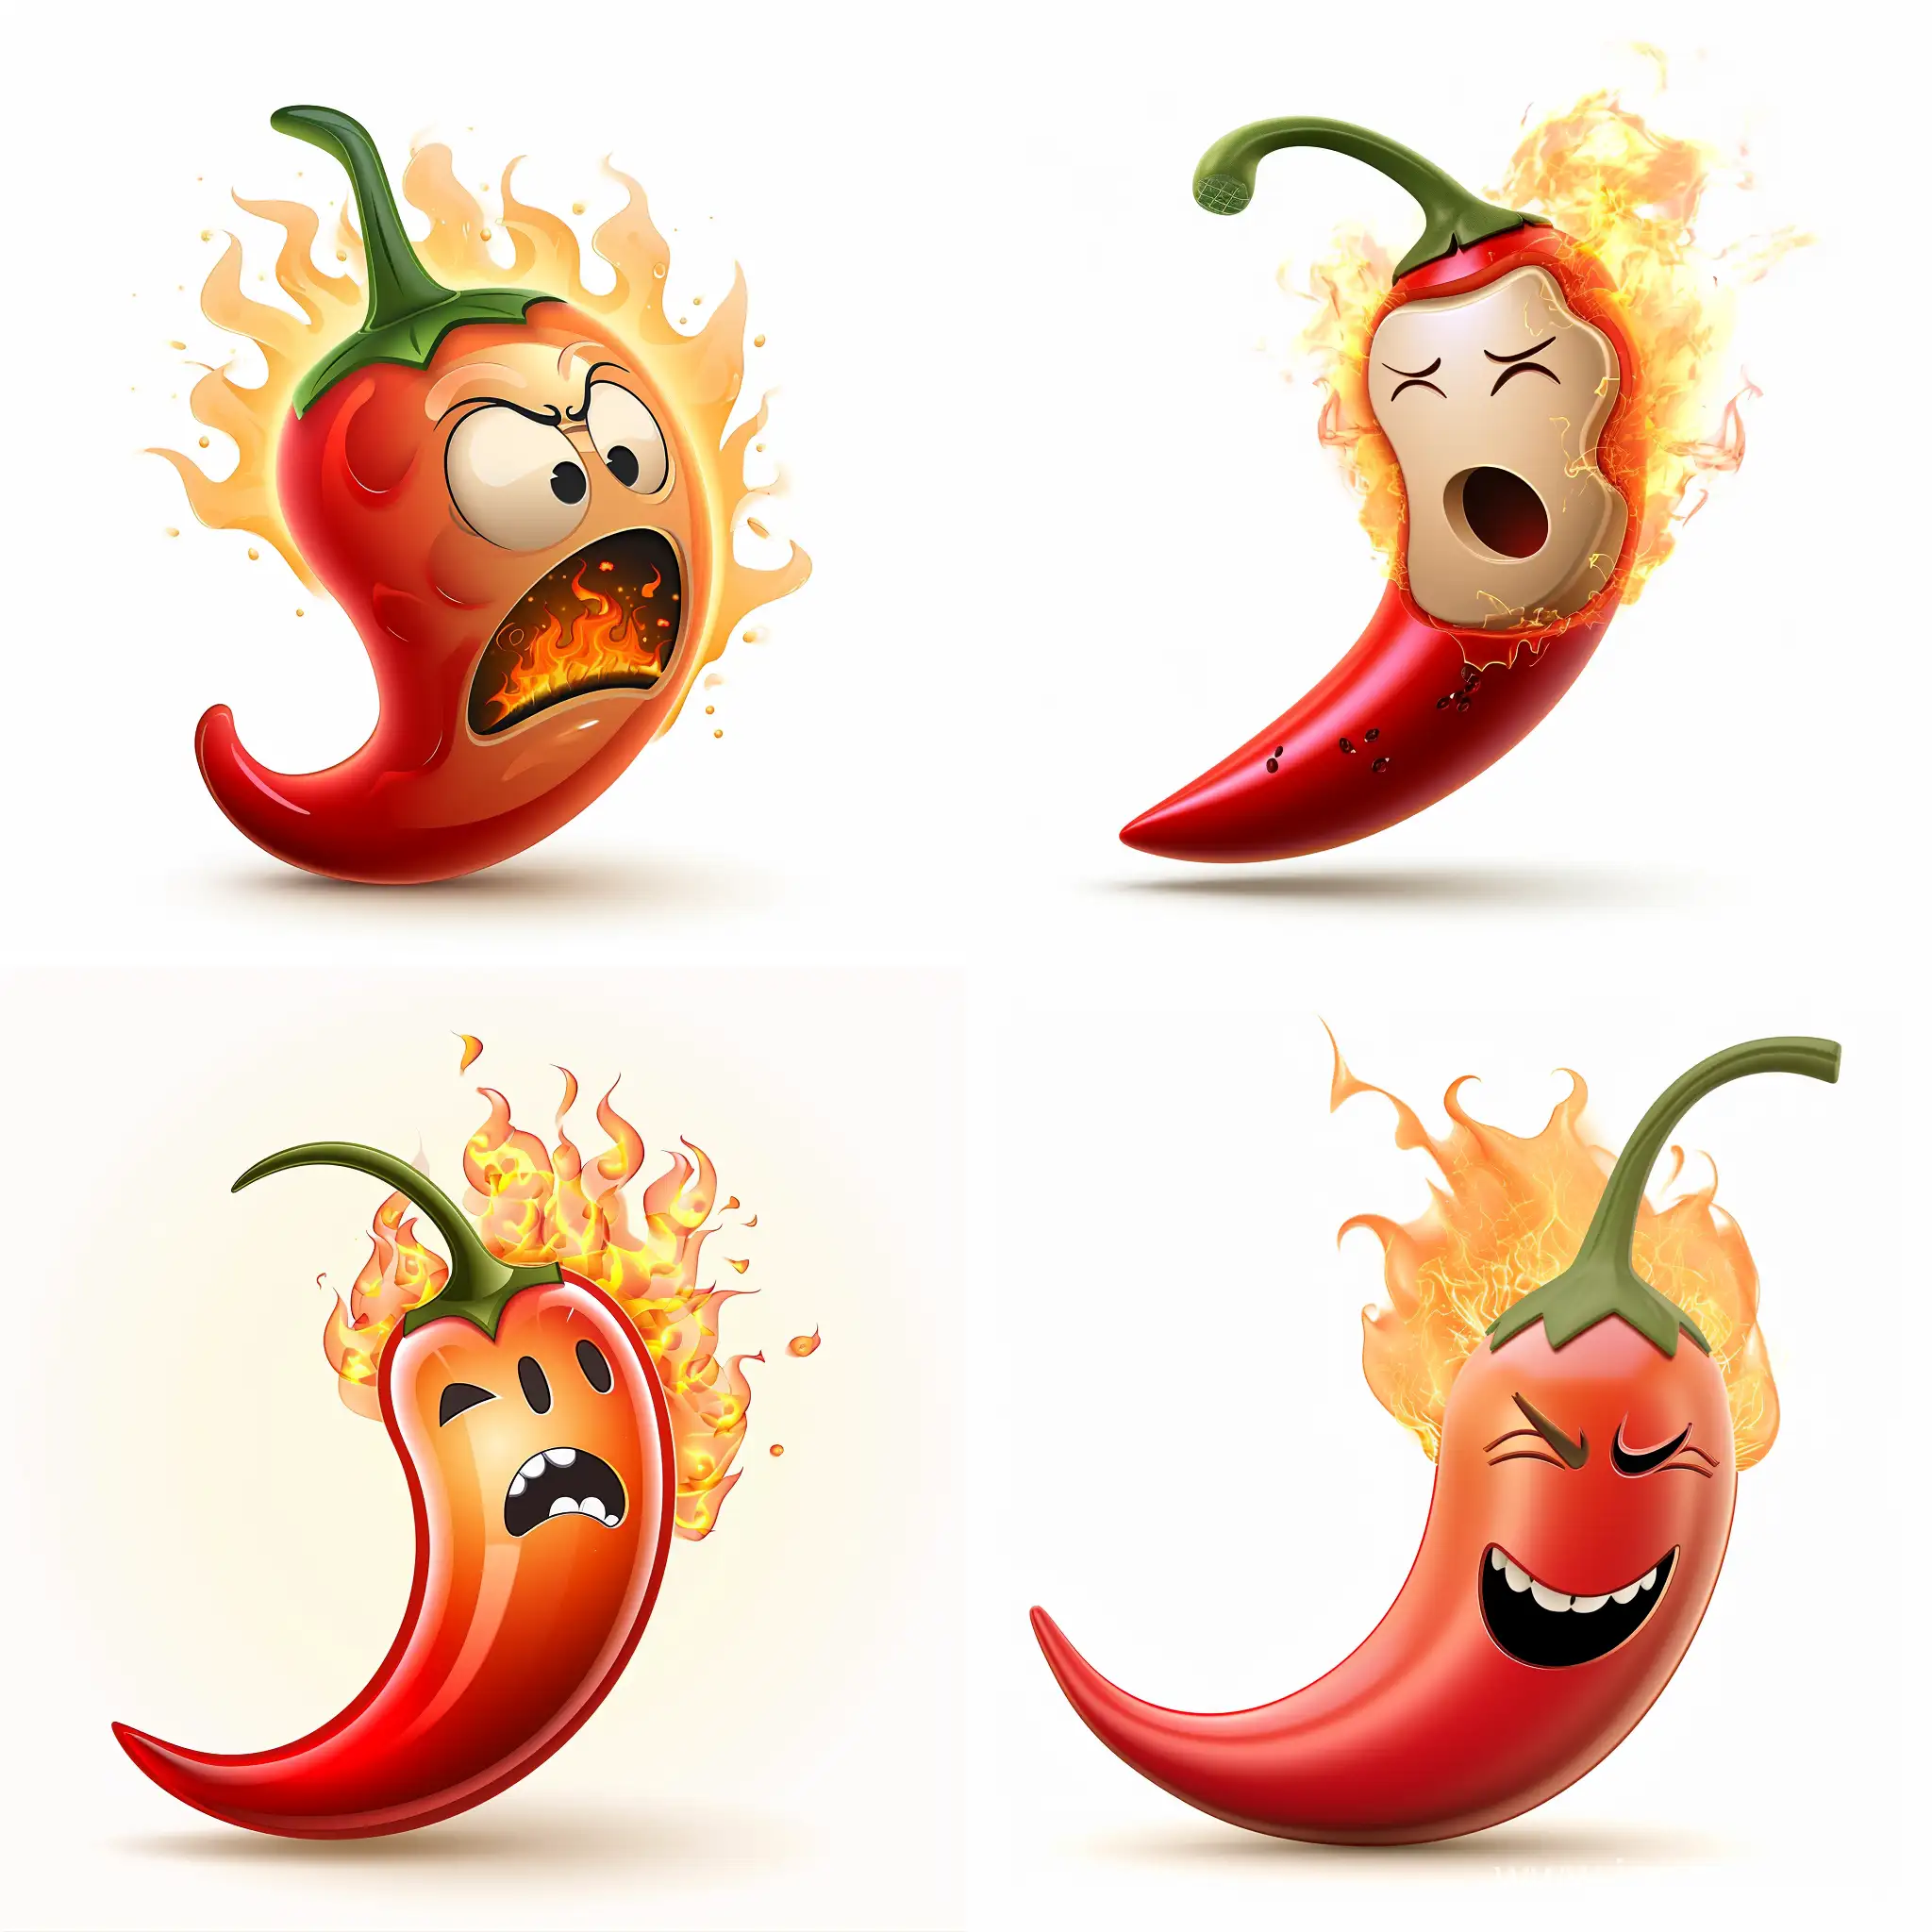 Spicy-Chili-Pepper-Emoji-with-Fiery-Expression-on-White-Background